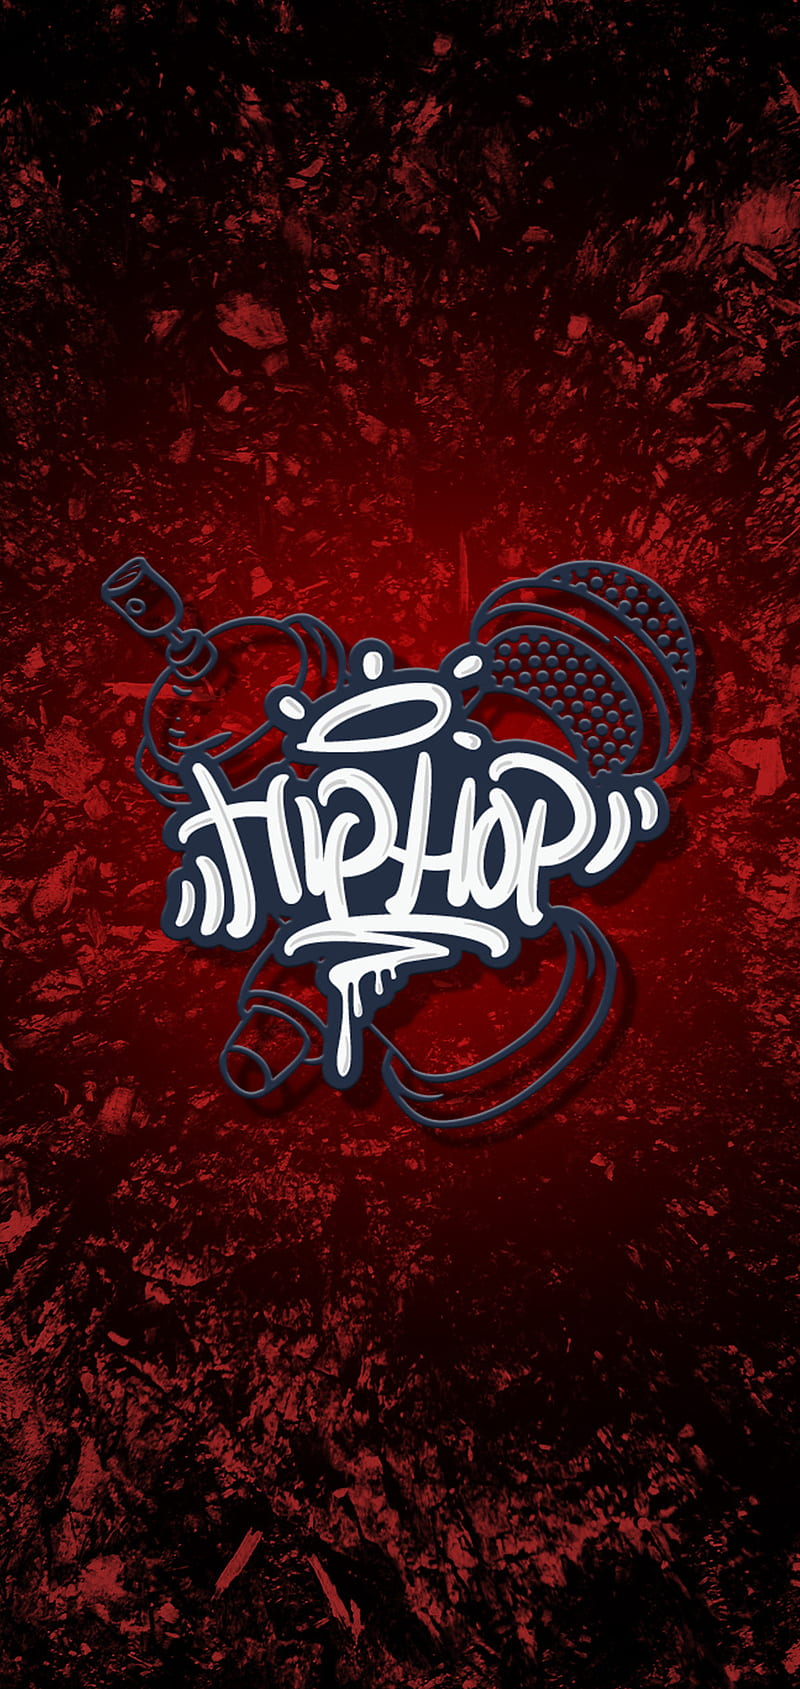 Hip hop, 2019, black, hiphop, new, red, saying, text, type, year, HD ...